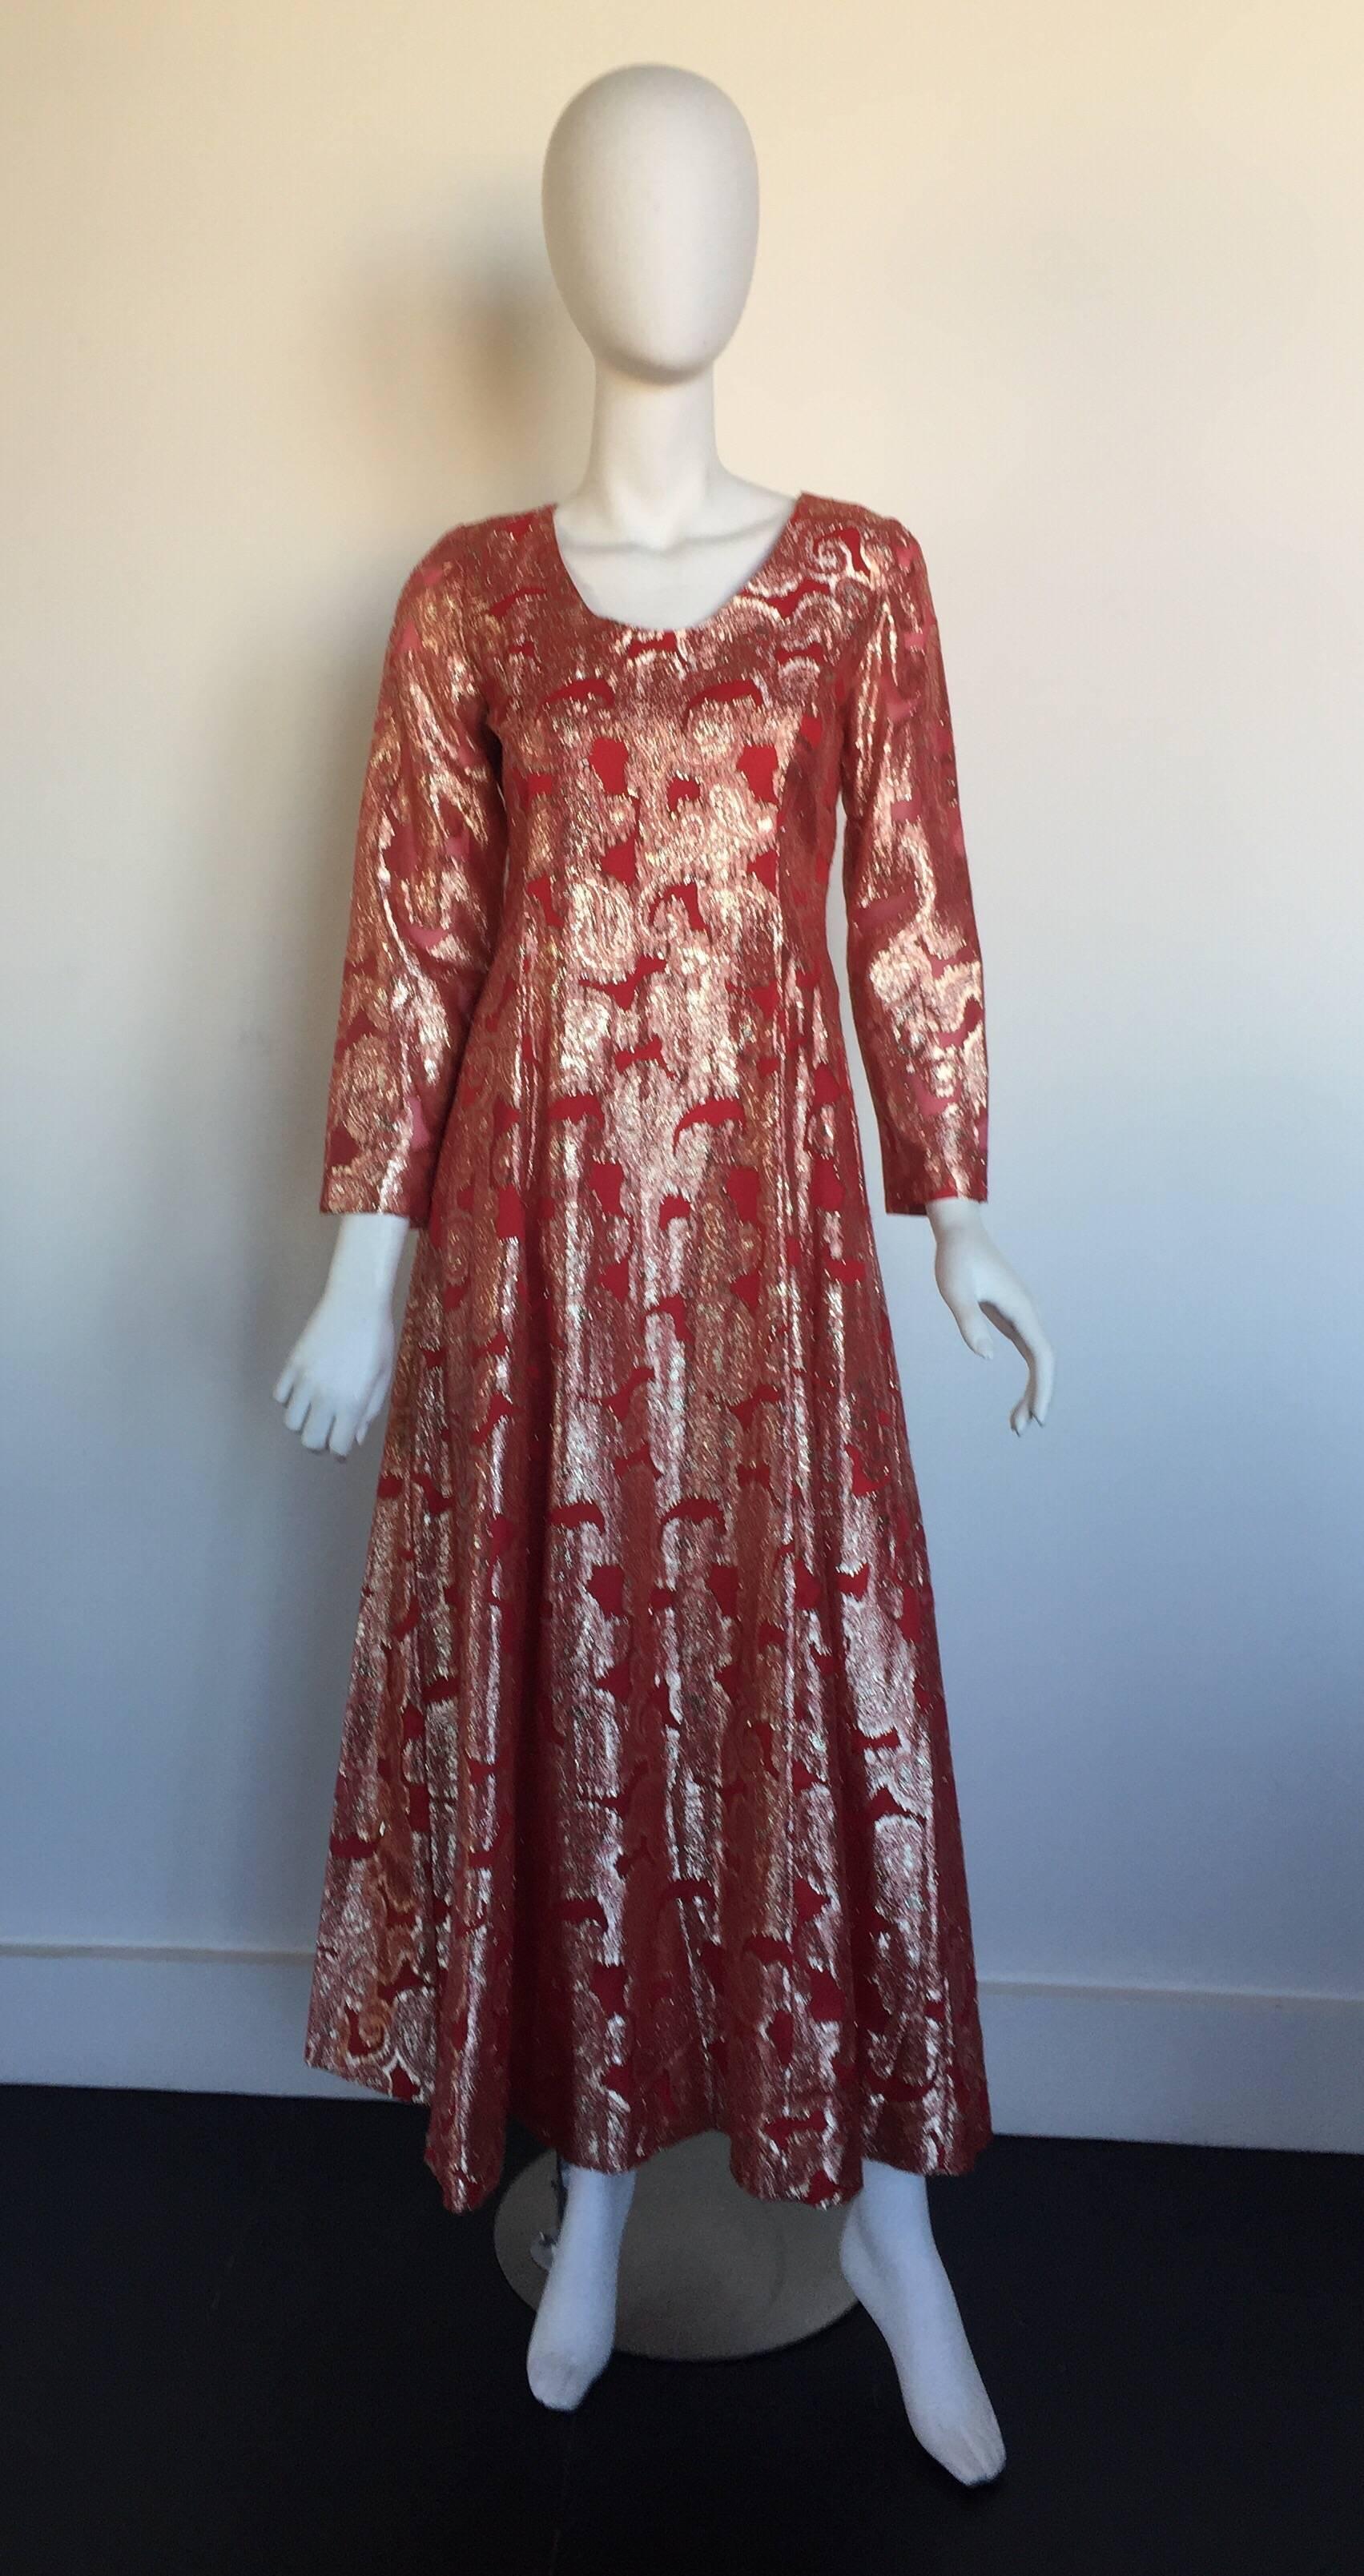 This cool 1970s long sleeve maze dress has a burnt orange/red and gold brocade design.  